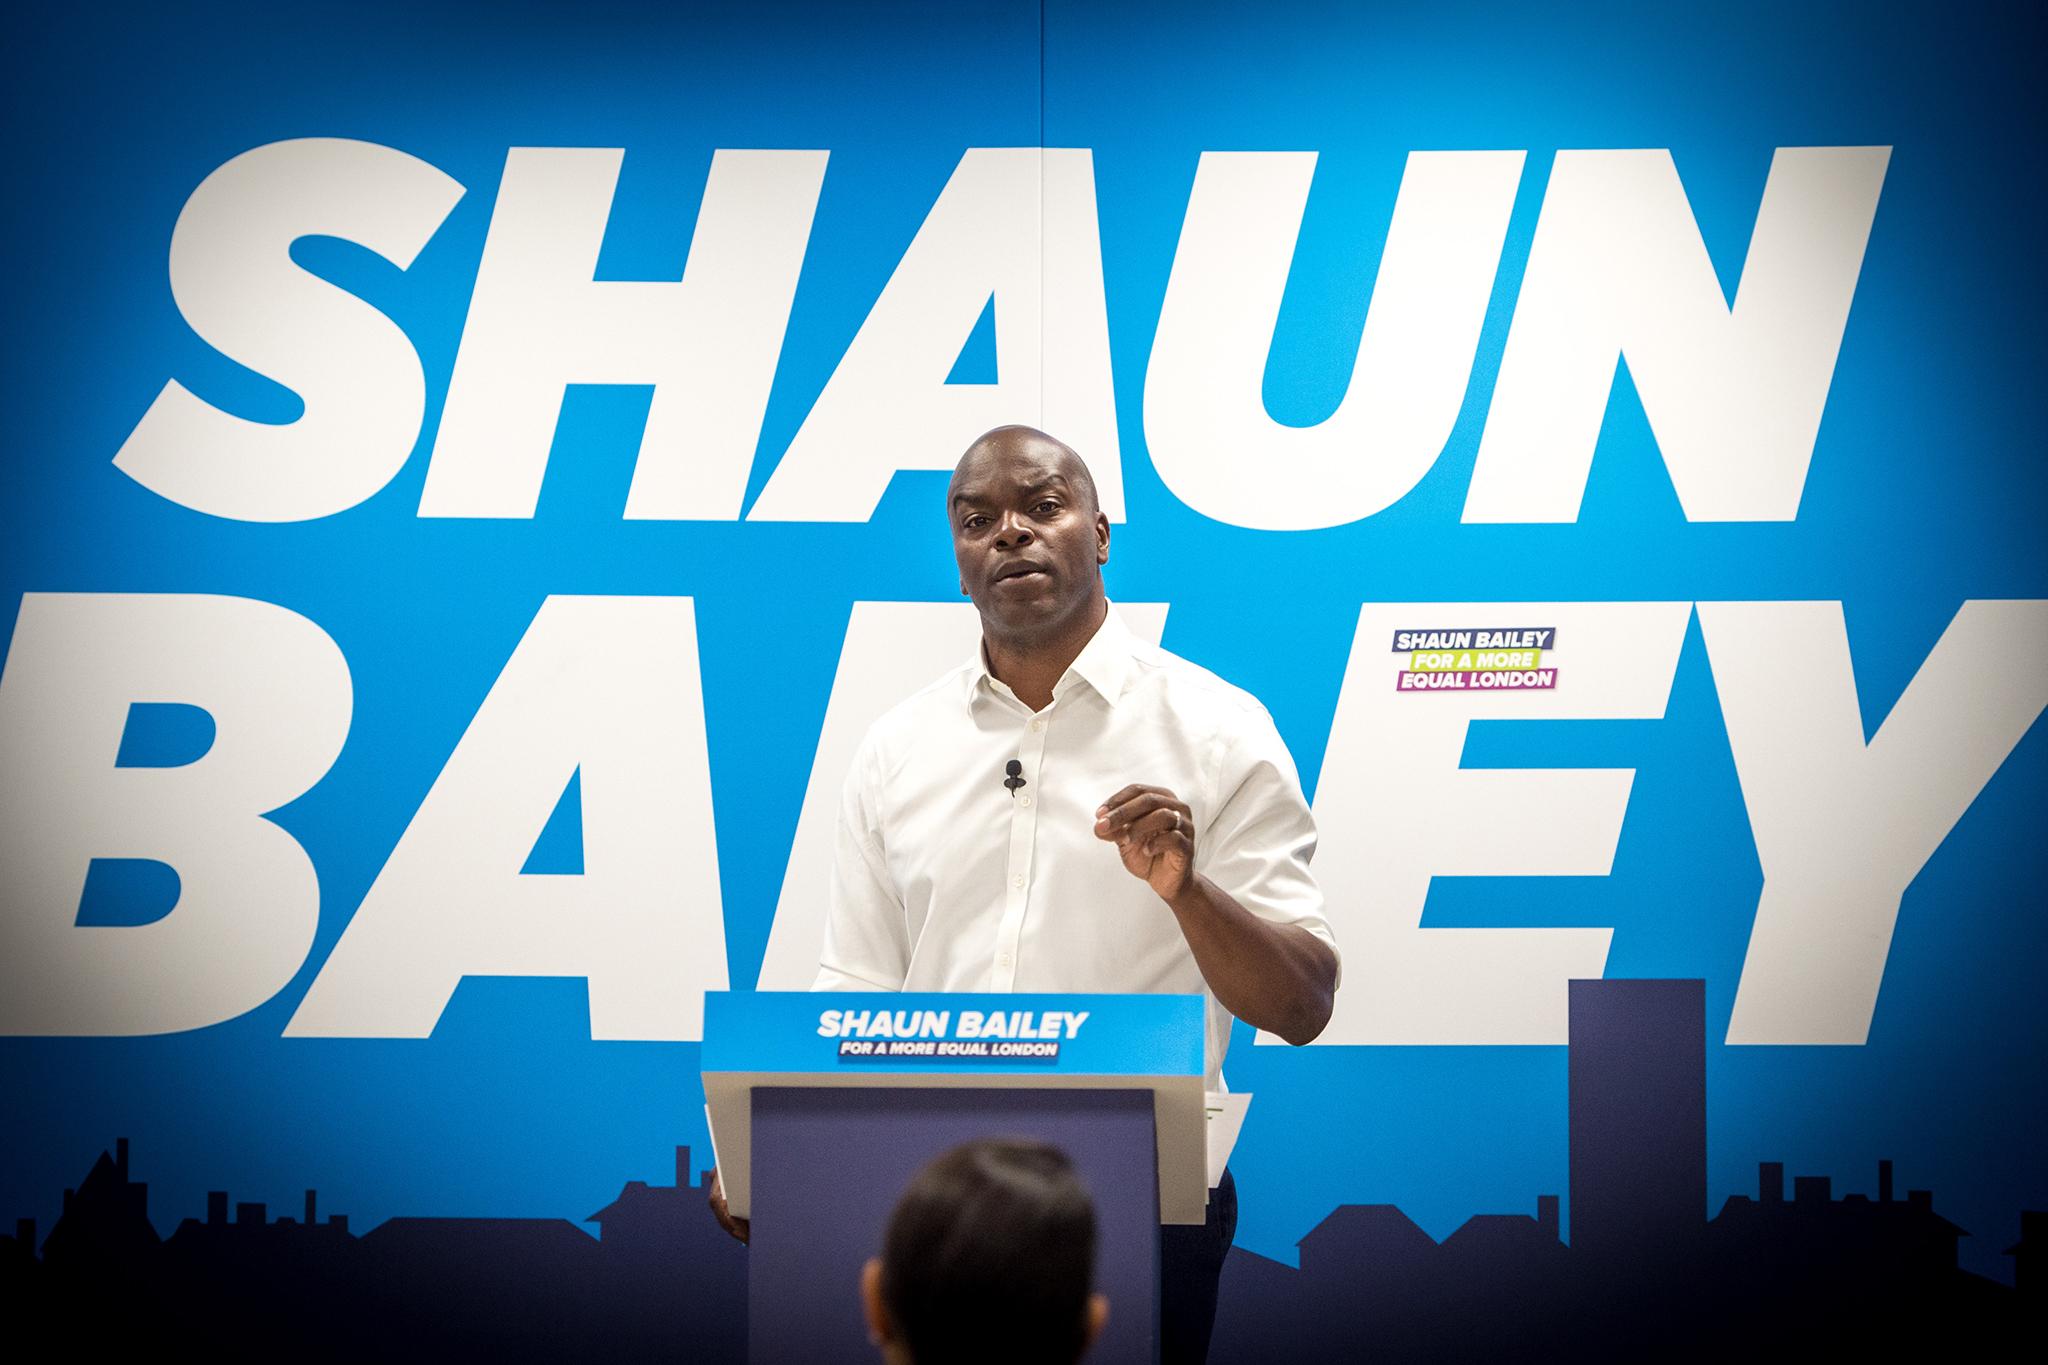 Shaun Bailey at Centre for Social Justice on 5 August 2020 Courtesy: Centre for Social Justice